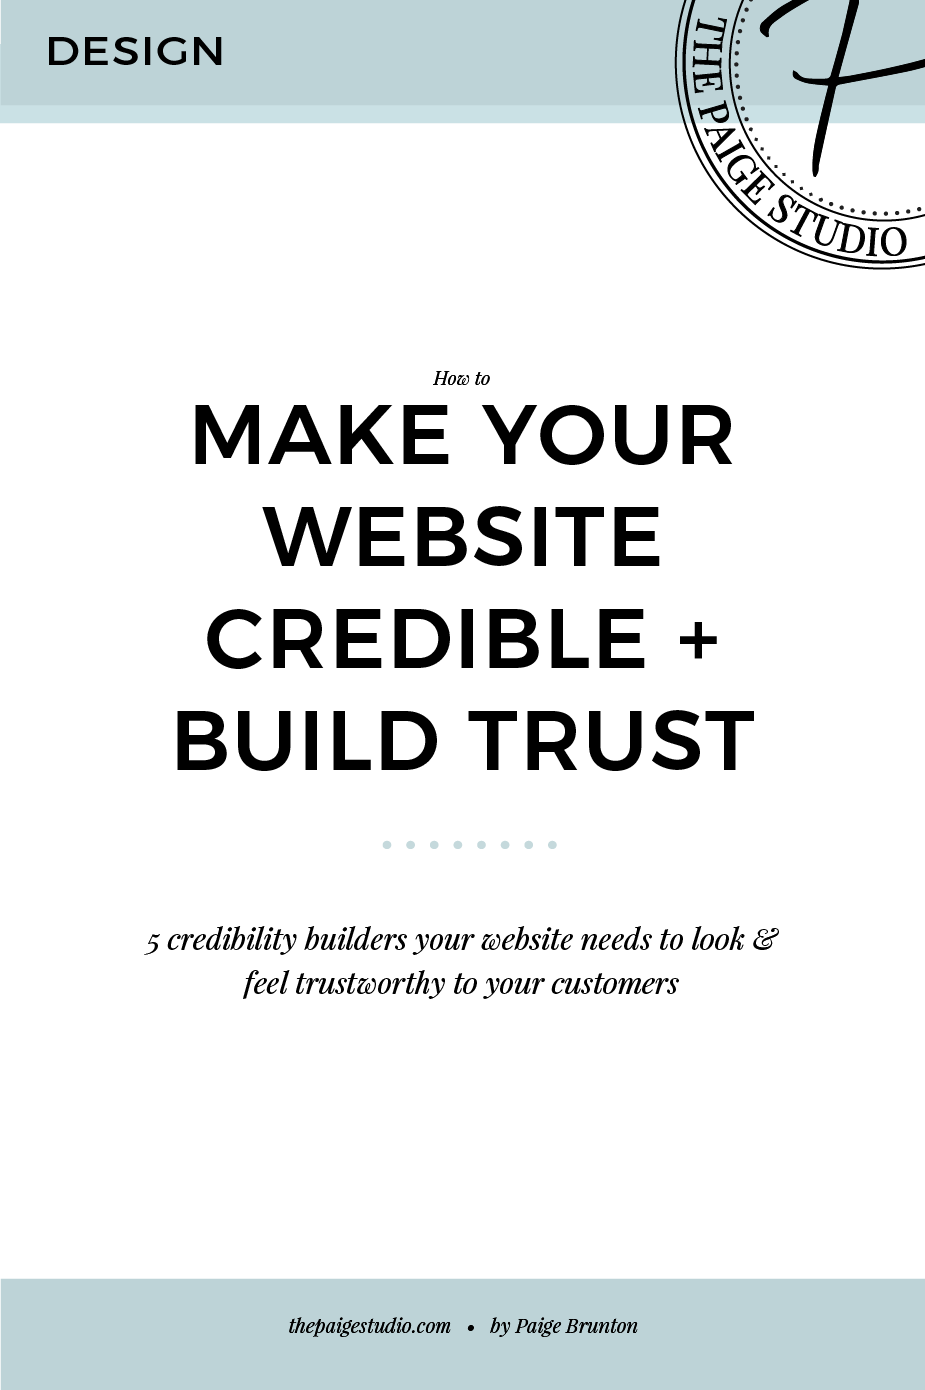 What are the 5 ways to know if a website is credible or not?